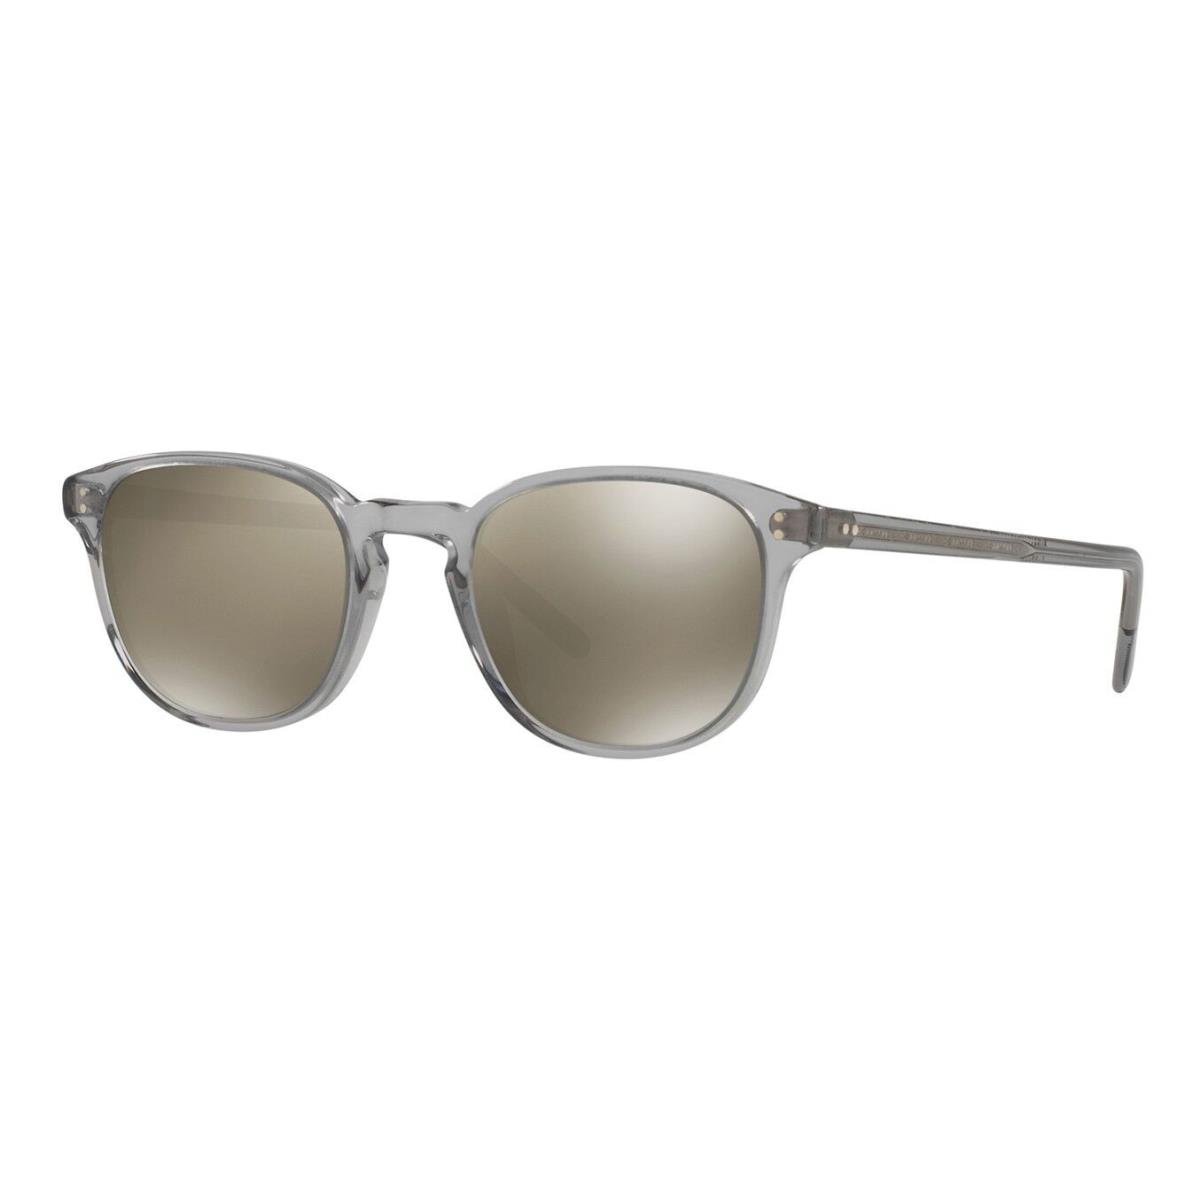 Oliver Peoples Fairmont OV 5219S Grey Goldtone Mirrored 1132/39 Sunglasses